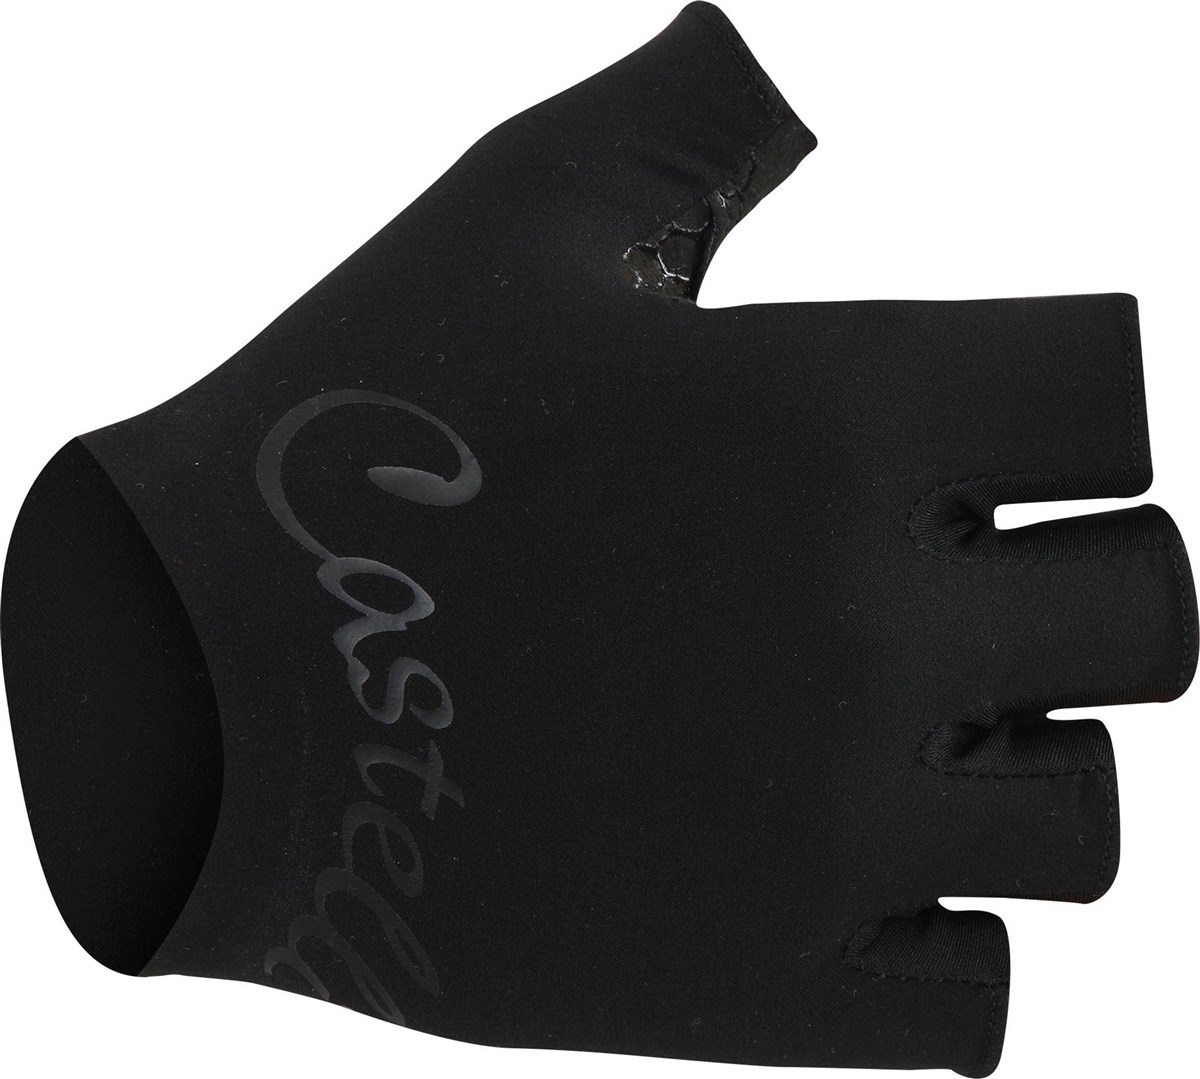 Castelli Secondapelle RC Womens Short Finger Cycling Gloves SS17